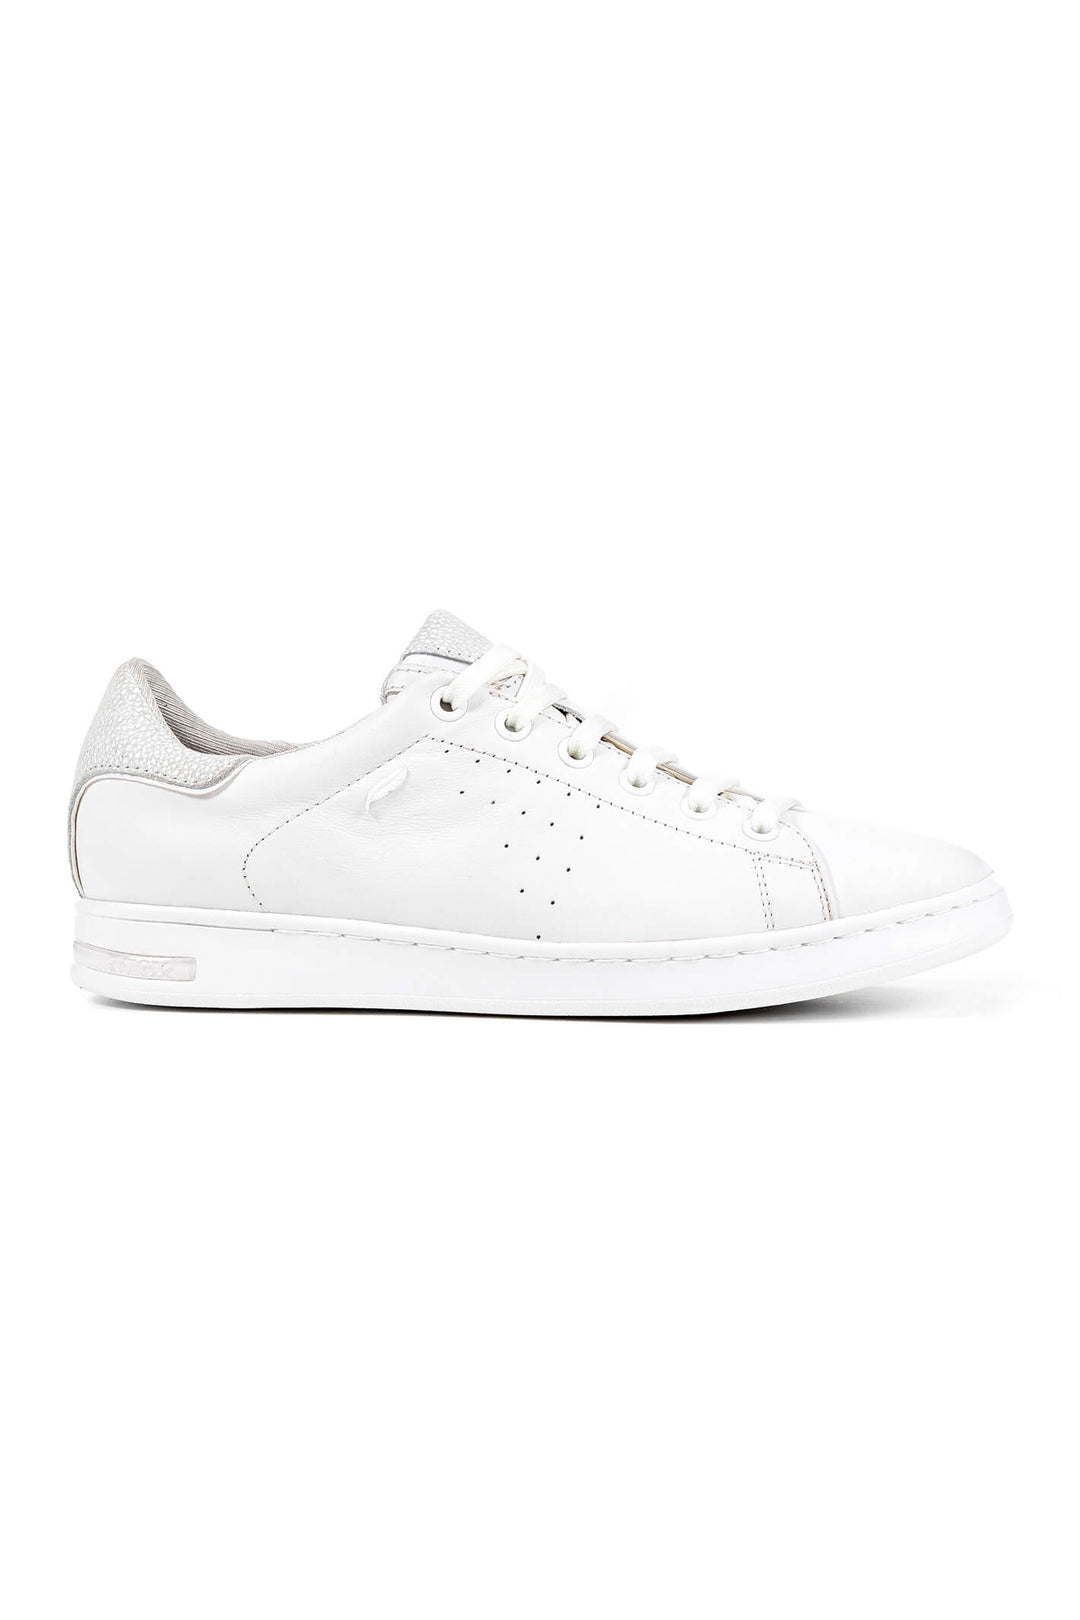 Geox D621BA Jaysen White Nappa Leather Trainers - Dotique